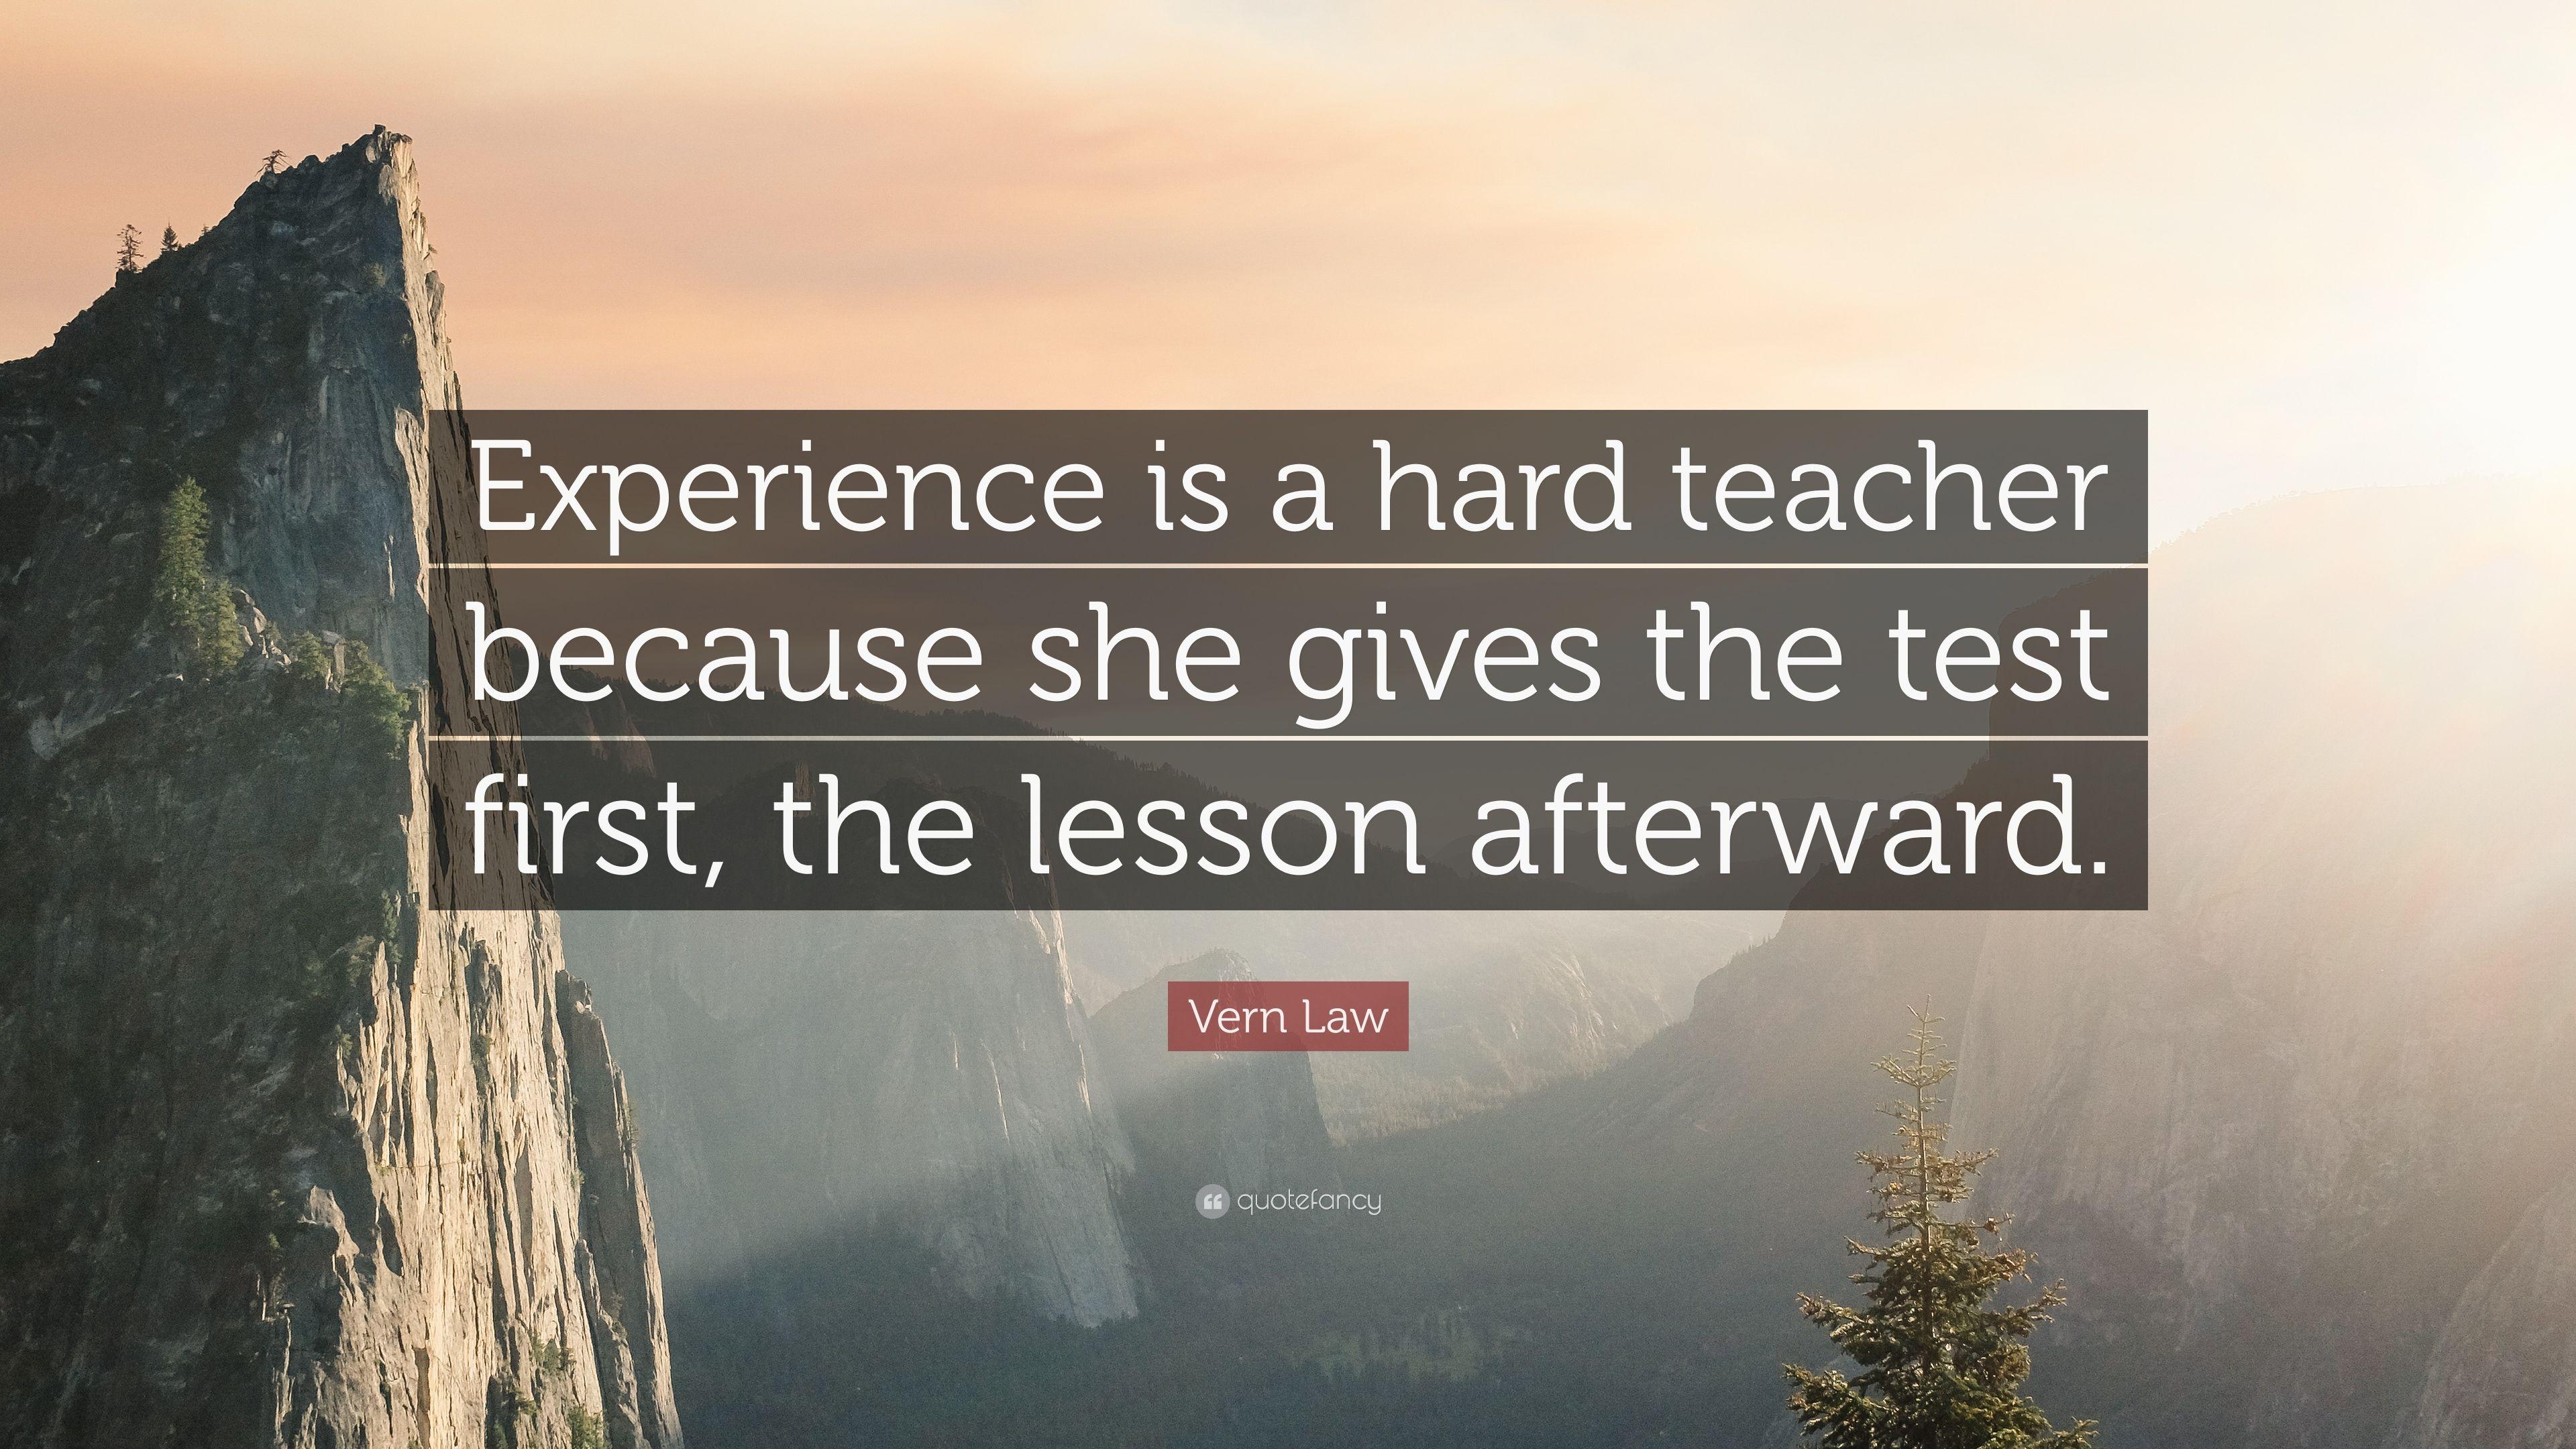 Vern Law Quote: “Experience is a hard teacher because she gives